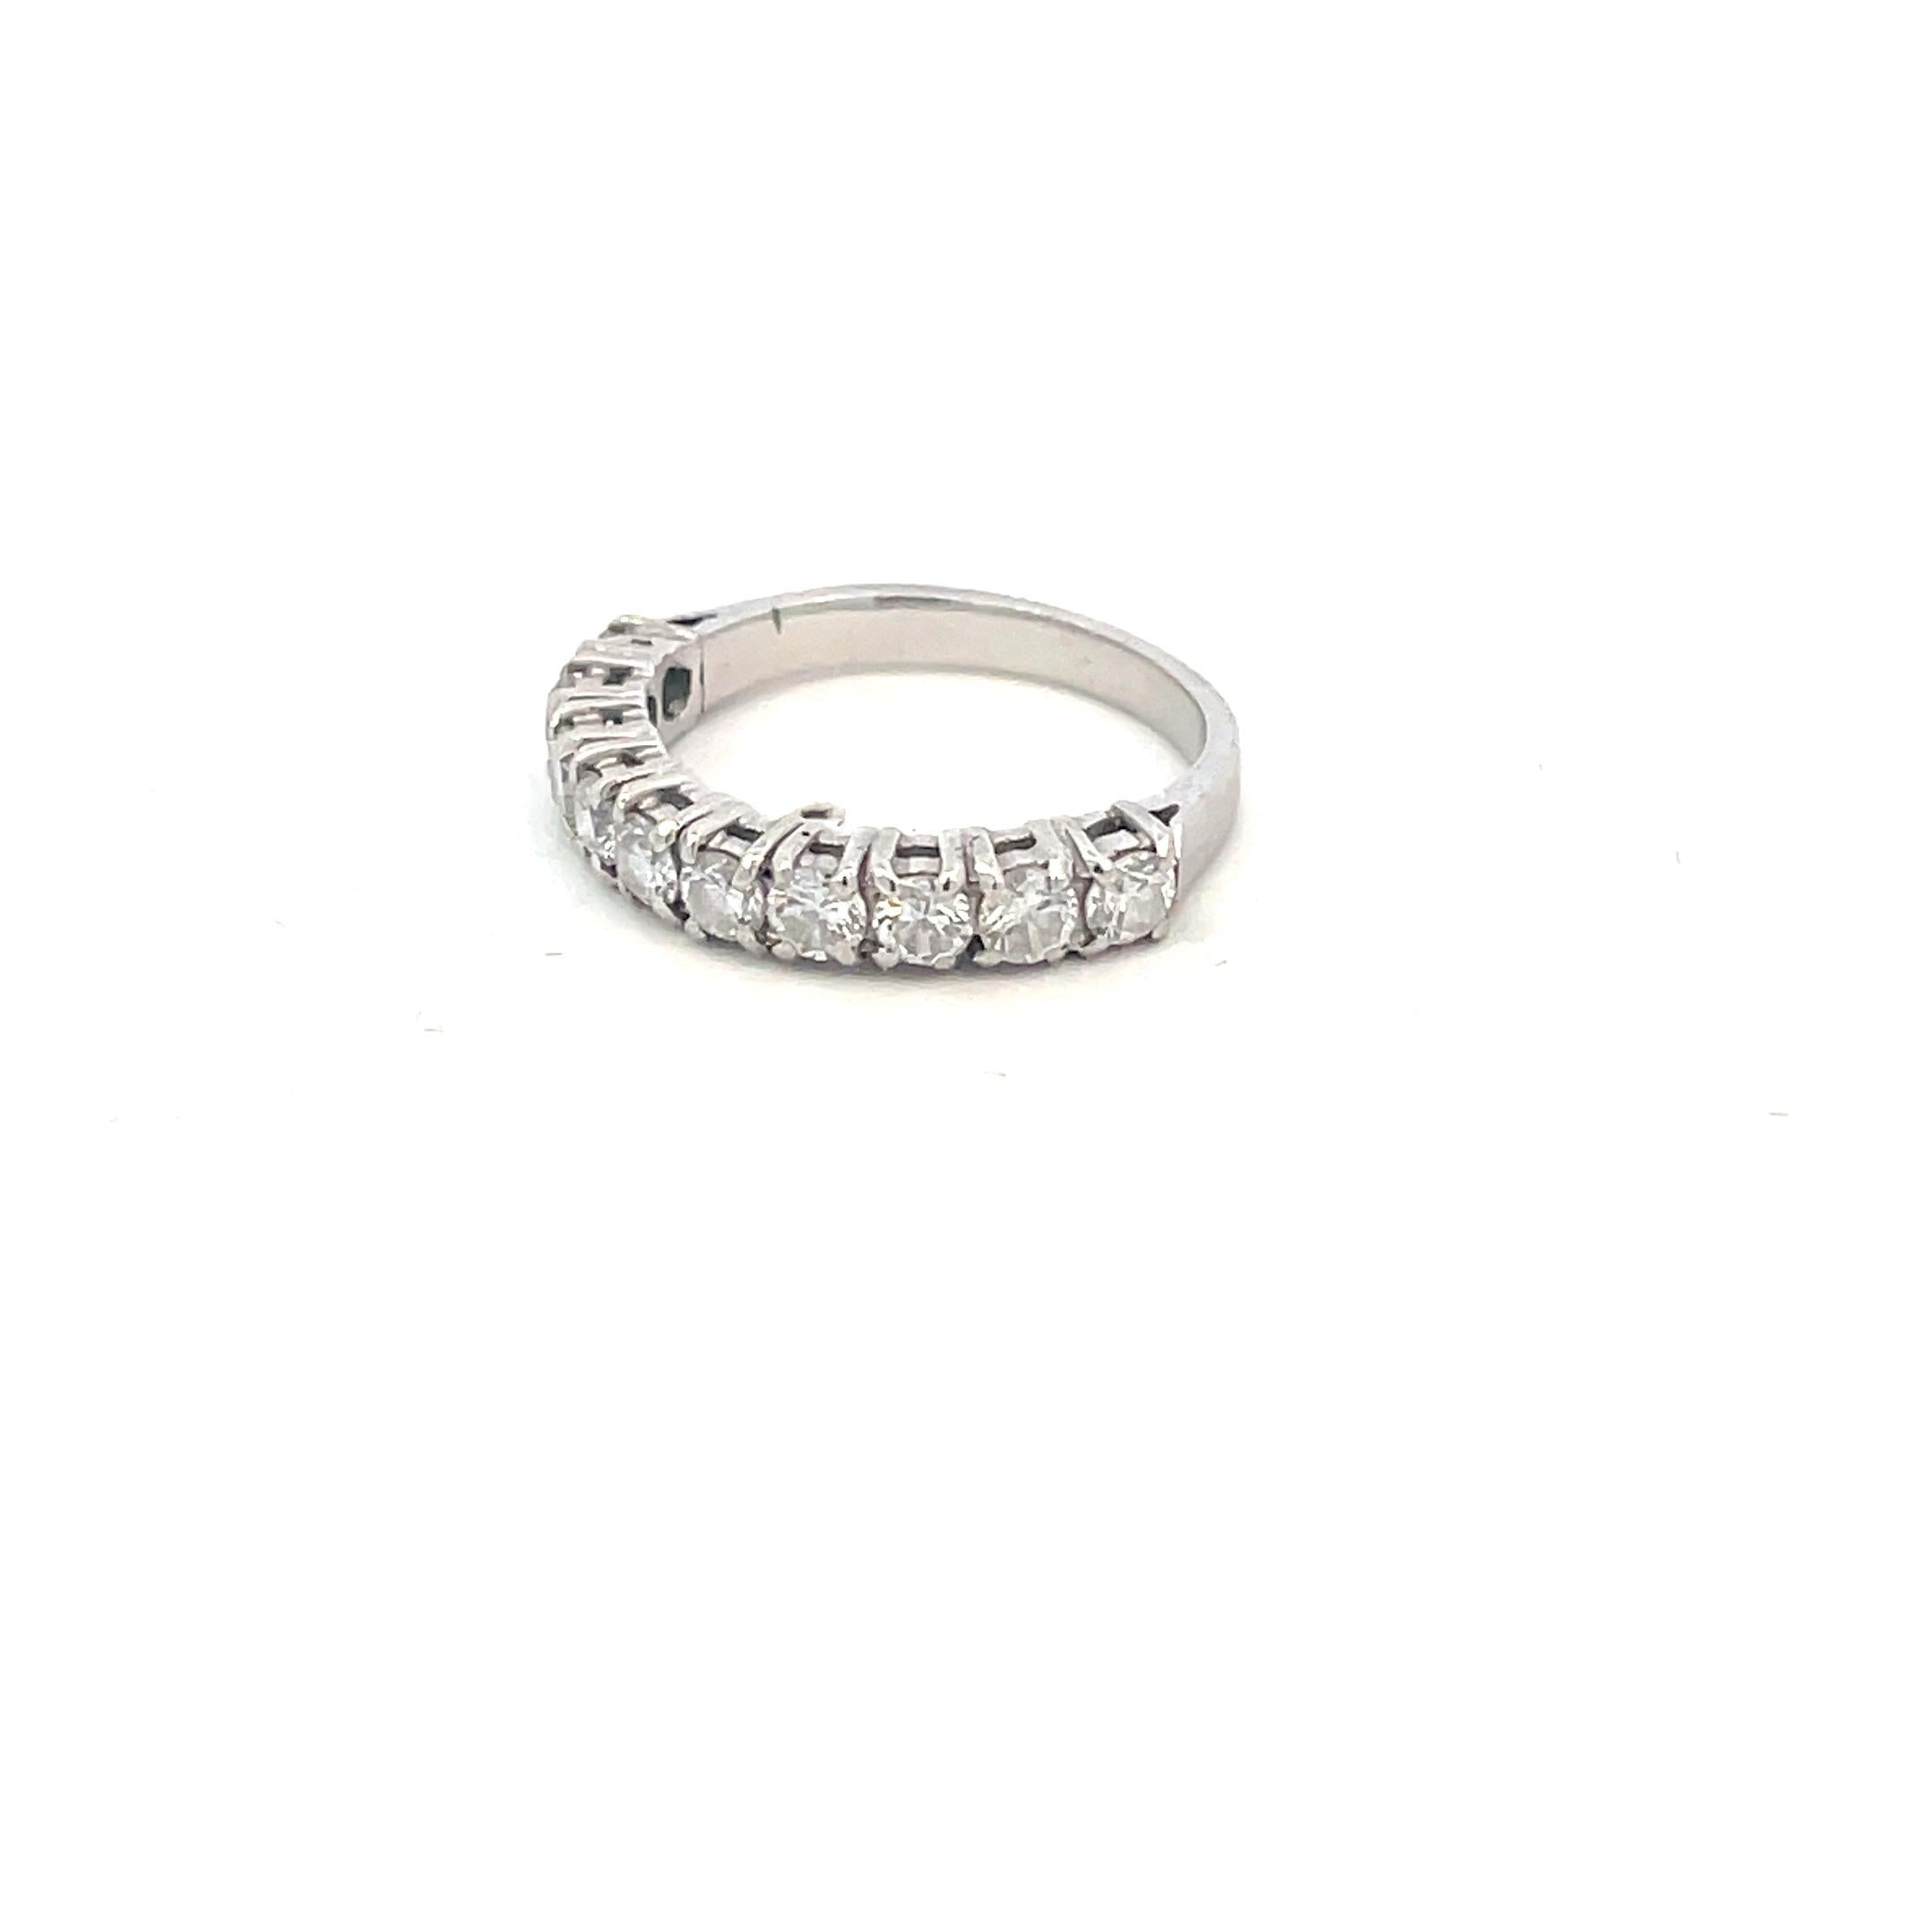 A diamond half eternity platinum ring, the ten round brilliant-cut diamonds weights all about 0.07 cts each ,  estimated to weigh 0.70 carats in total, all claw set to an 18Kt White Gold mount.

This ring is in excellent condition.

This classic and